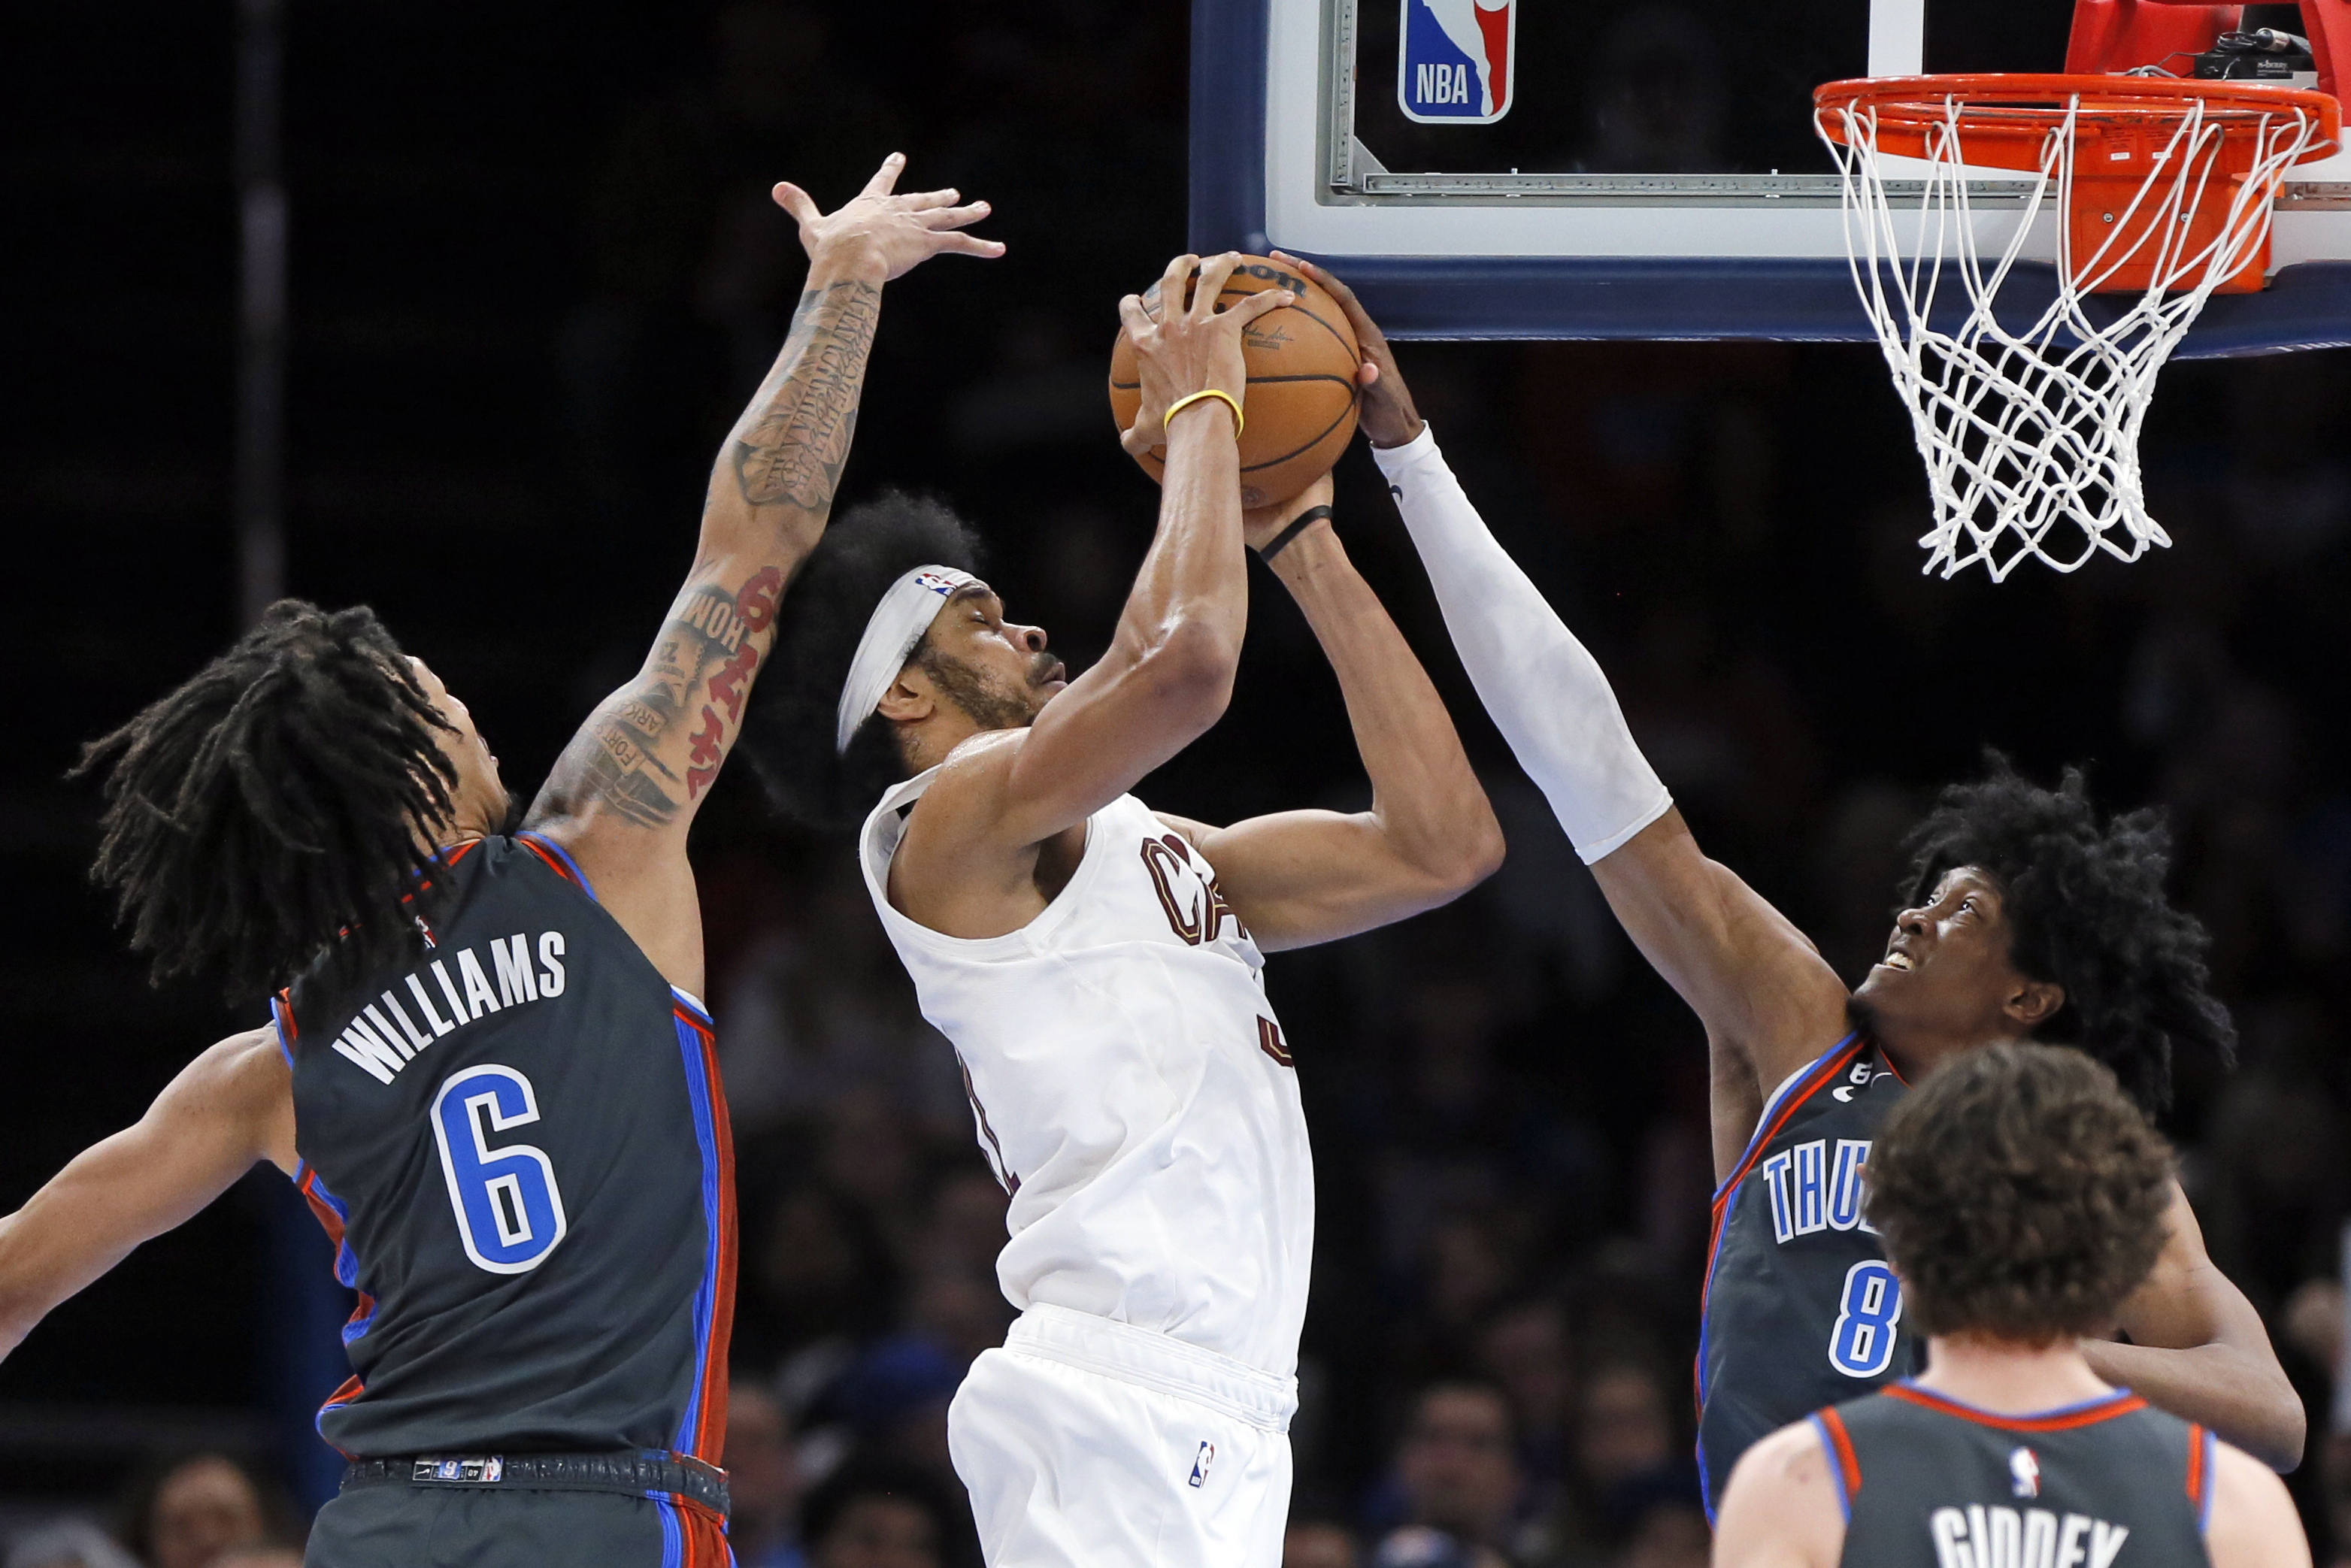 Oklahoma City Thunder's Jalen Williams, right, blocks a shot attempt by Cleveland Cavaliers' Jarrett Allen, while teammate Jaylin Williams also defends, during the second half of an NBA basketball game Friday January 27, 2023, in Oklahoma City.  (AP Photo/Nate Billings)